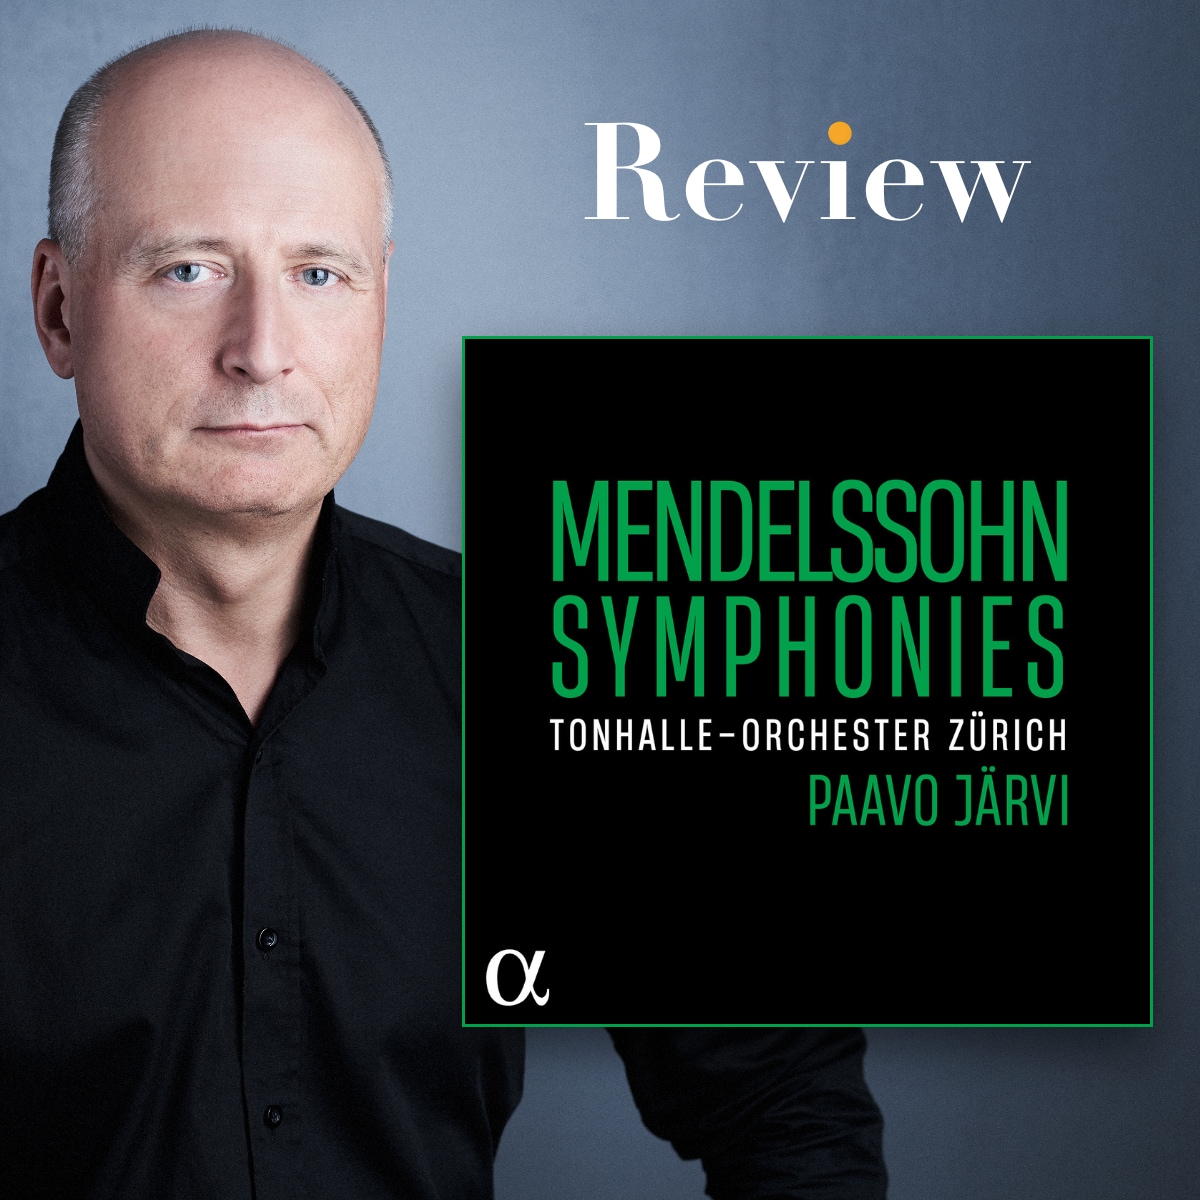 New #ClassicalMusic review: @paavo_jarvi leads the @tonhalle Zürich in Mendelssohn’s mature Symphonies and a midsummer night’s dream on @Outheremusic: bit.ly/Mendelssohn_Ja…